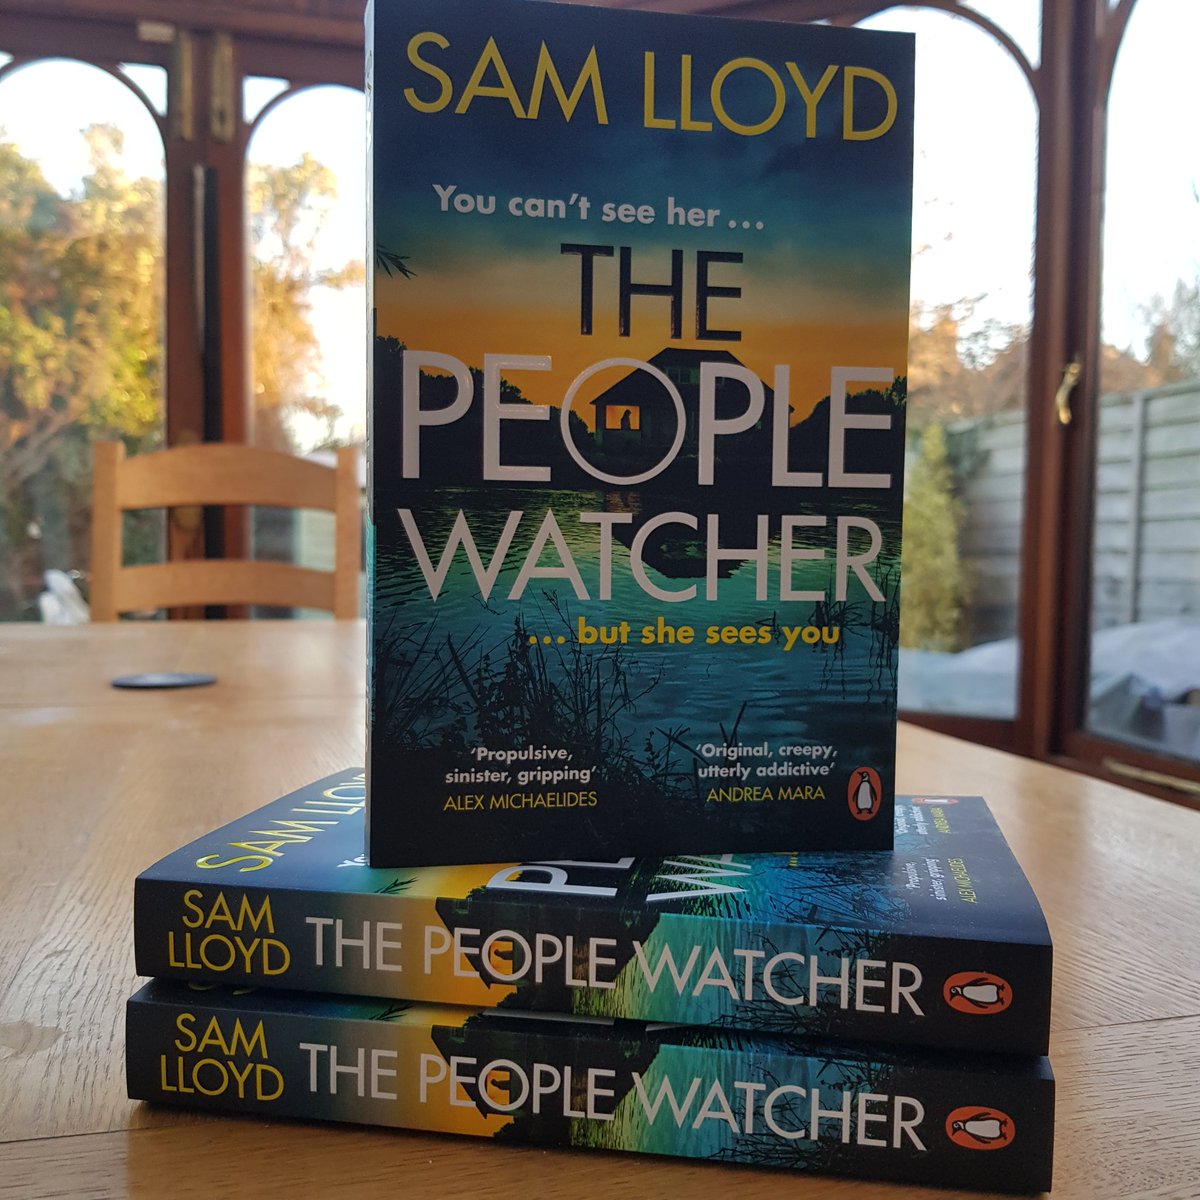 #giveaway Last call for entries! To celebrate the paperback release of #ThePeopleWatcher, out now, I'm giving away THREE signed copies. To enter just like, follow and RT! UK only, closes midnight 31 Jan. #competition #win #free #books #reading #bookgiveaway